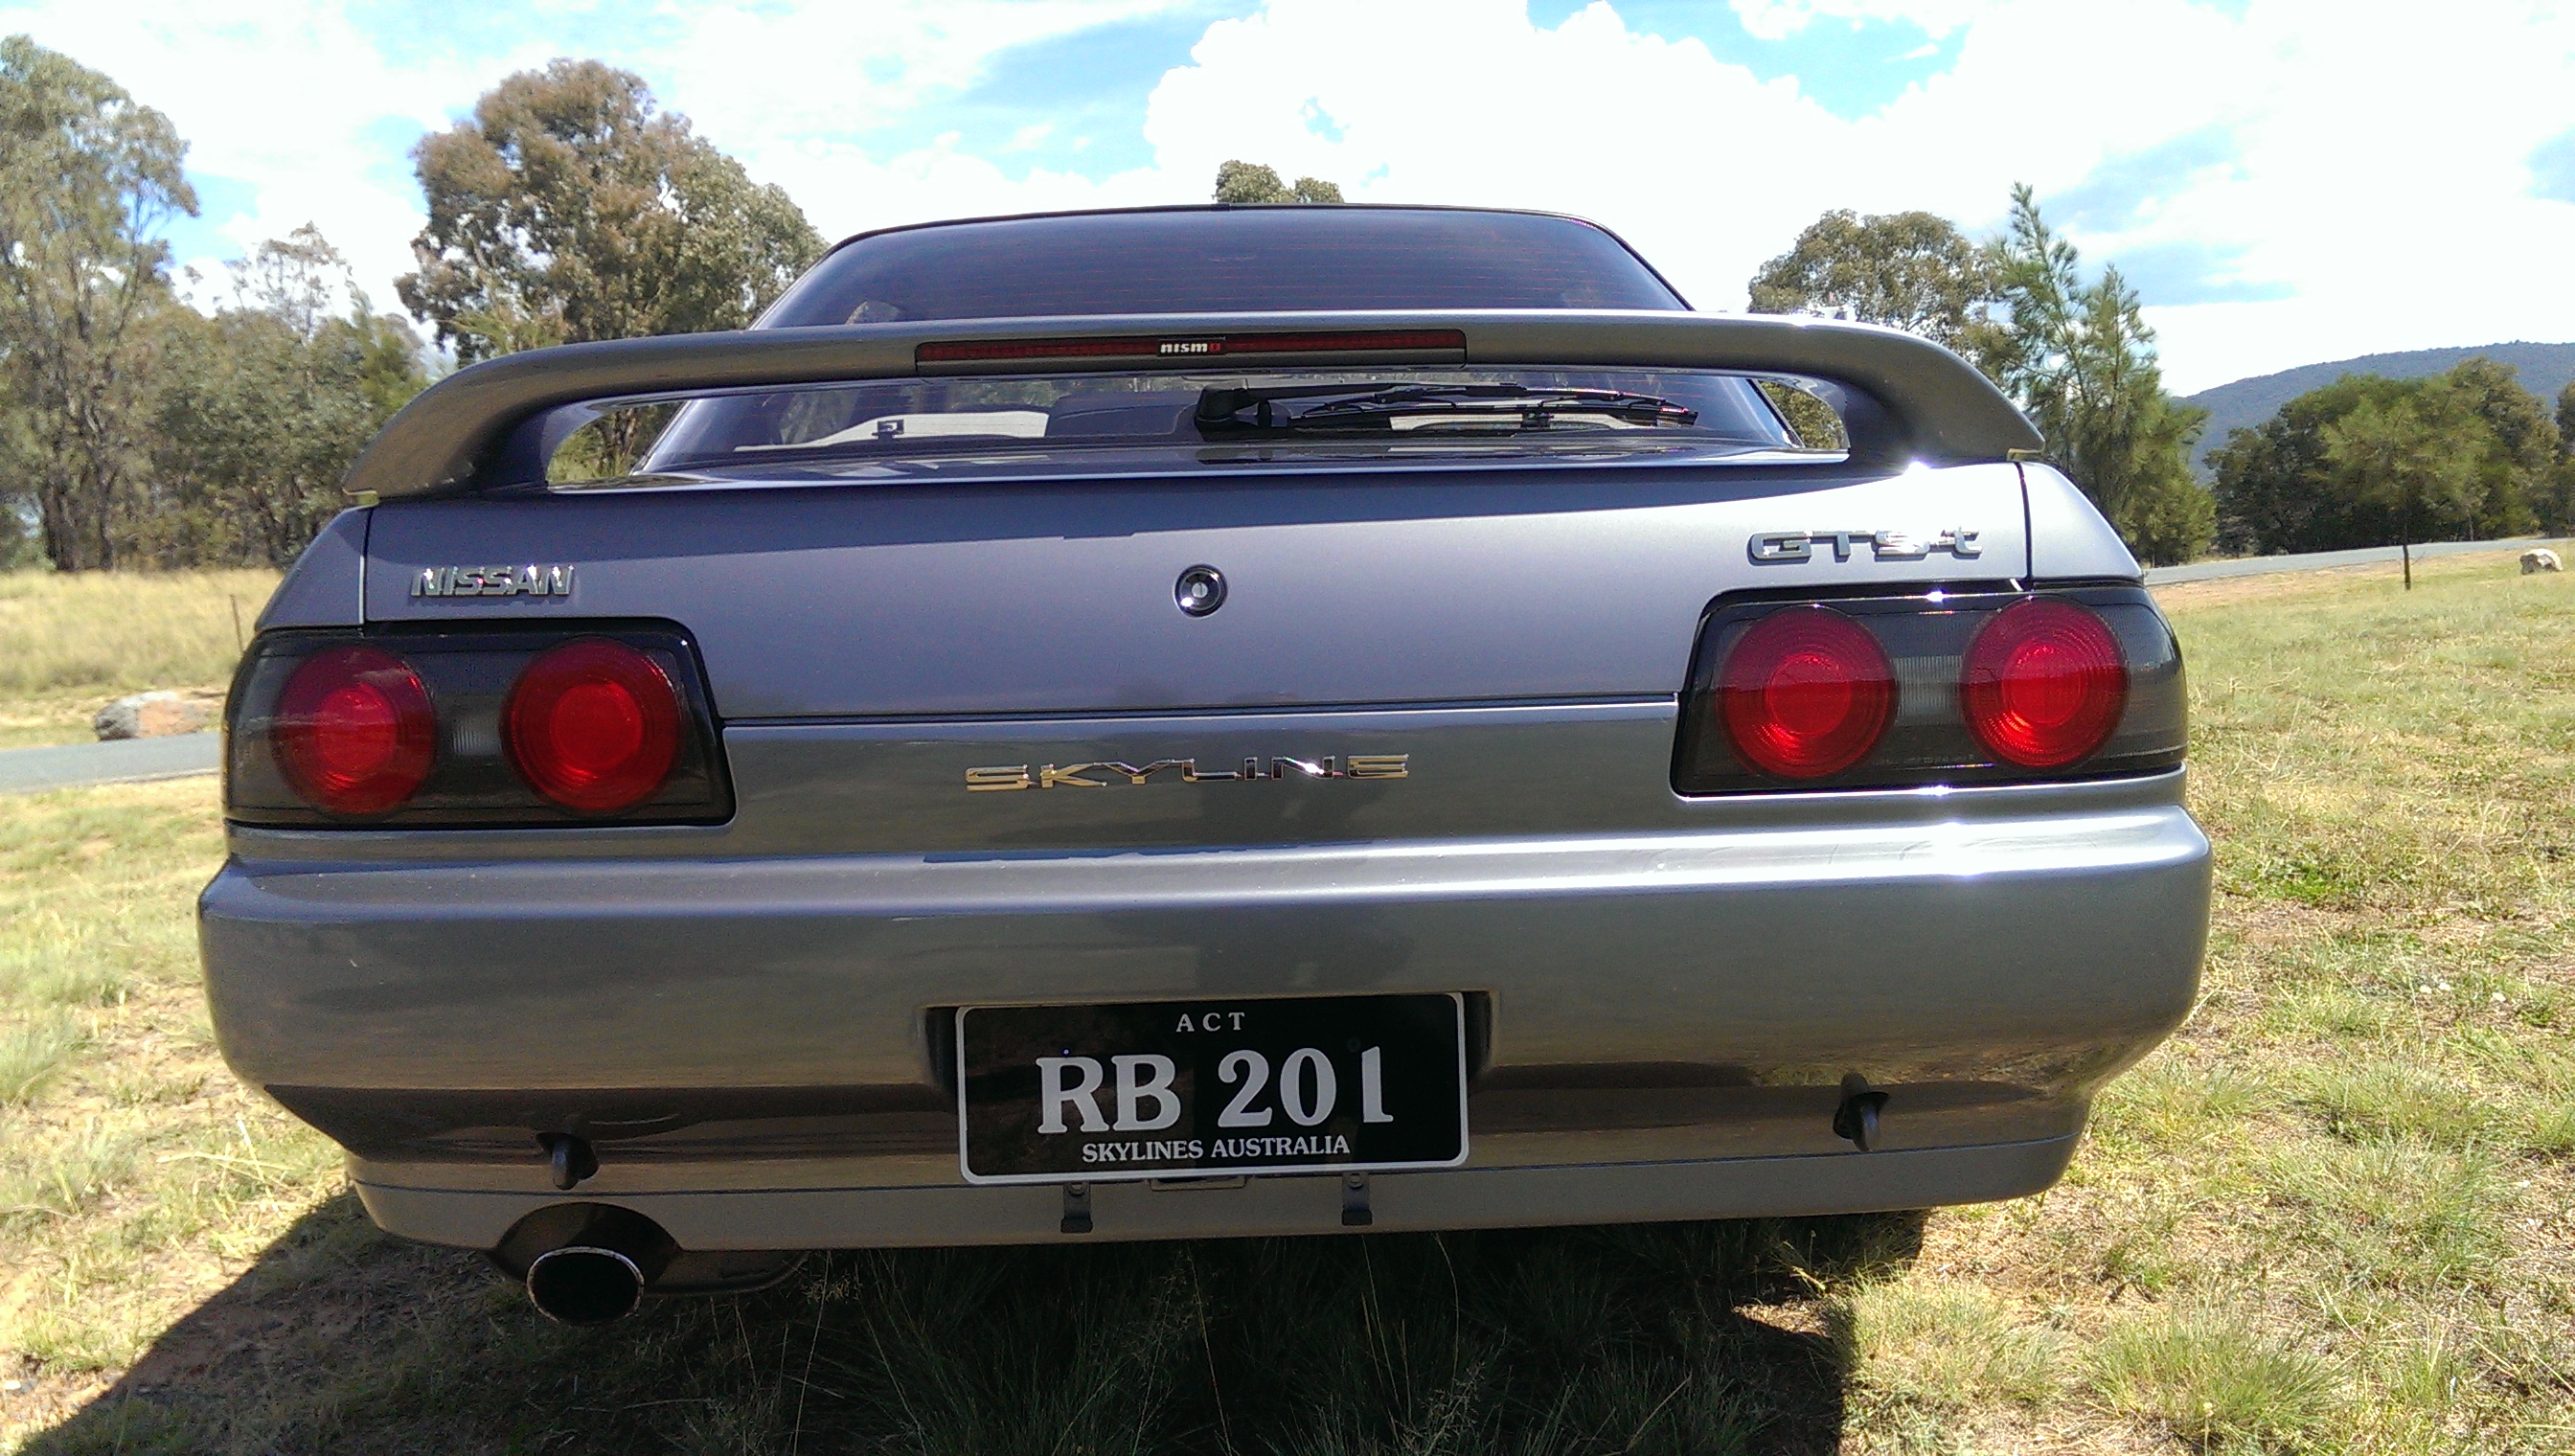 Sold R32 4 Door Gts T Type M Nissan Skyline In Original Trim For Sale Private Whole Cars Only Sau Community